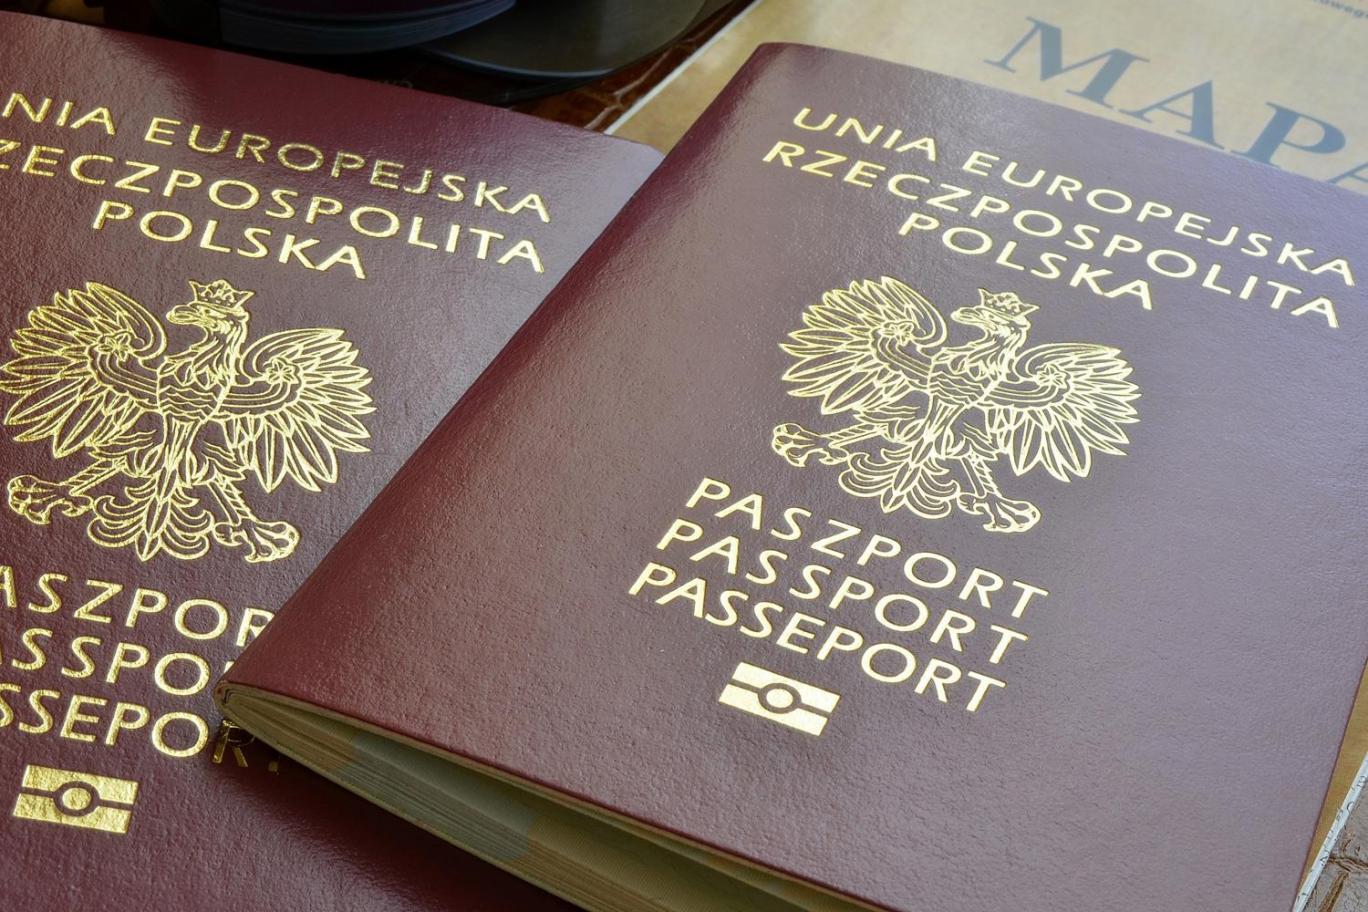 It is now possible for tourists from Poland to get an electronic visa valid for three months and multiple entries to Vietnam in 2023